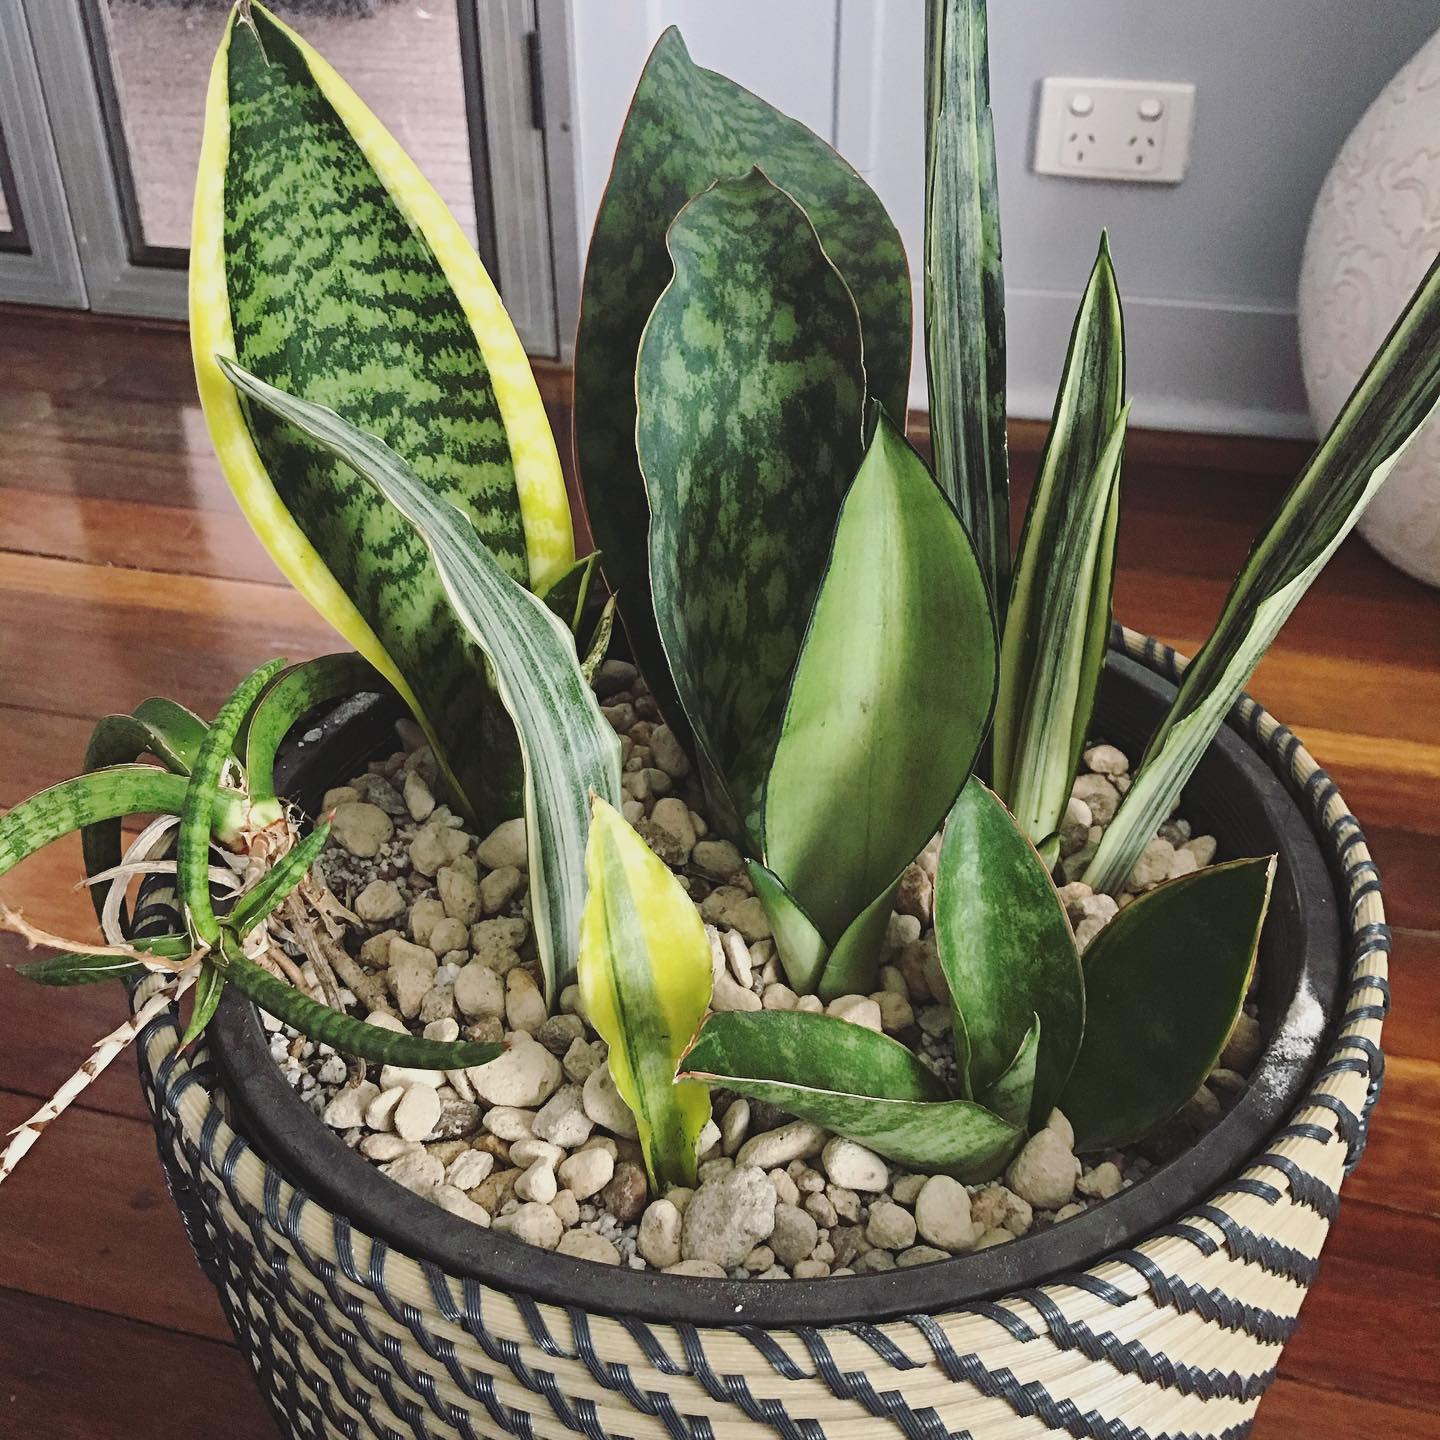 Top 40 Most Popular Types Of Sansevieria Pictorial Guide